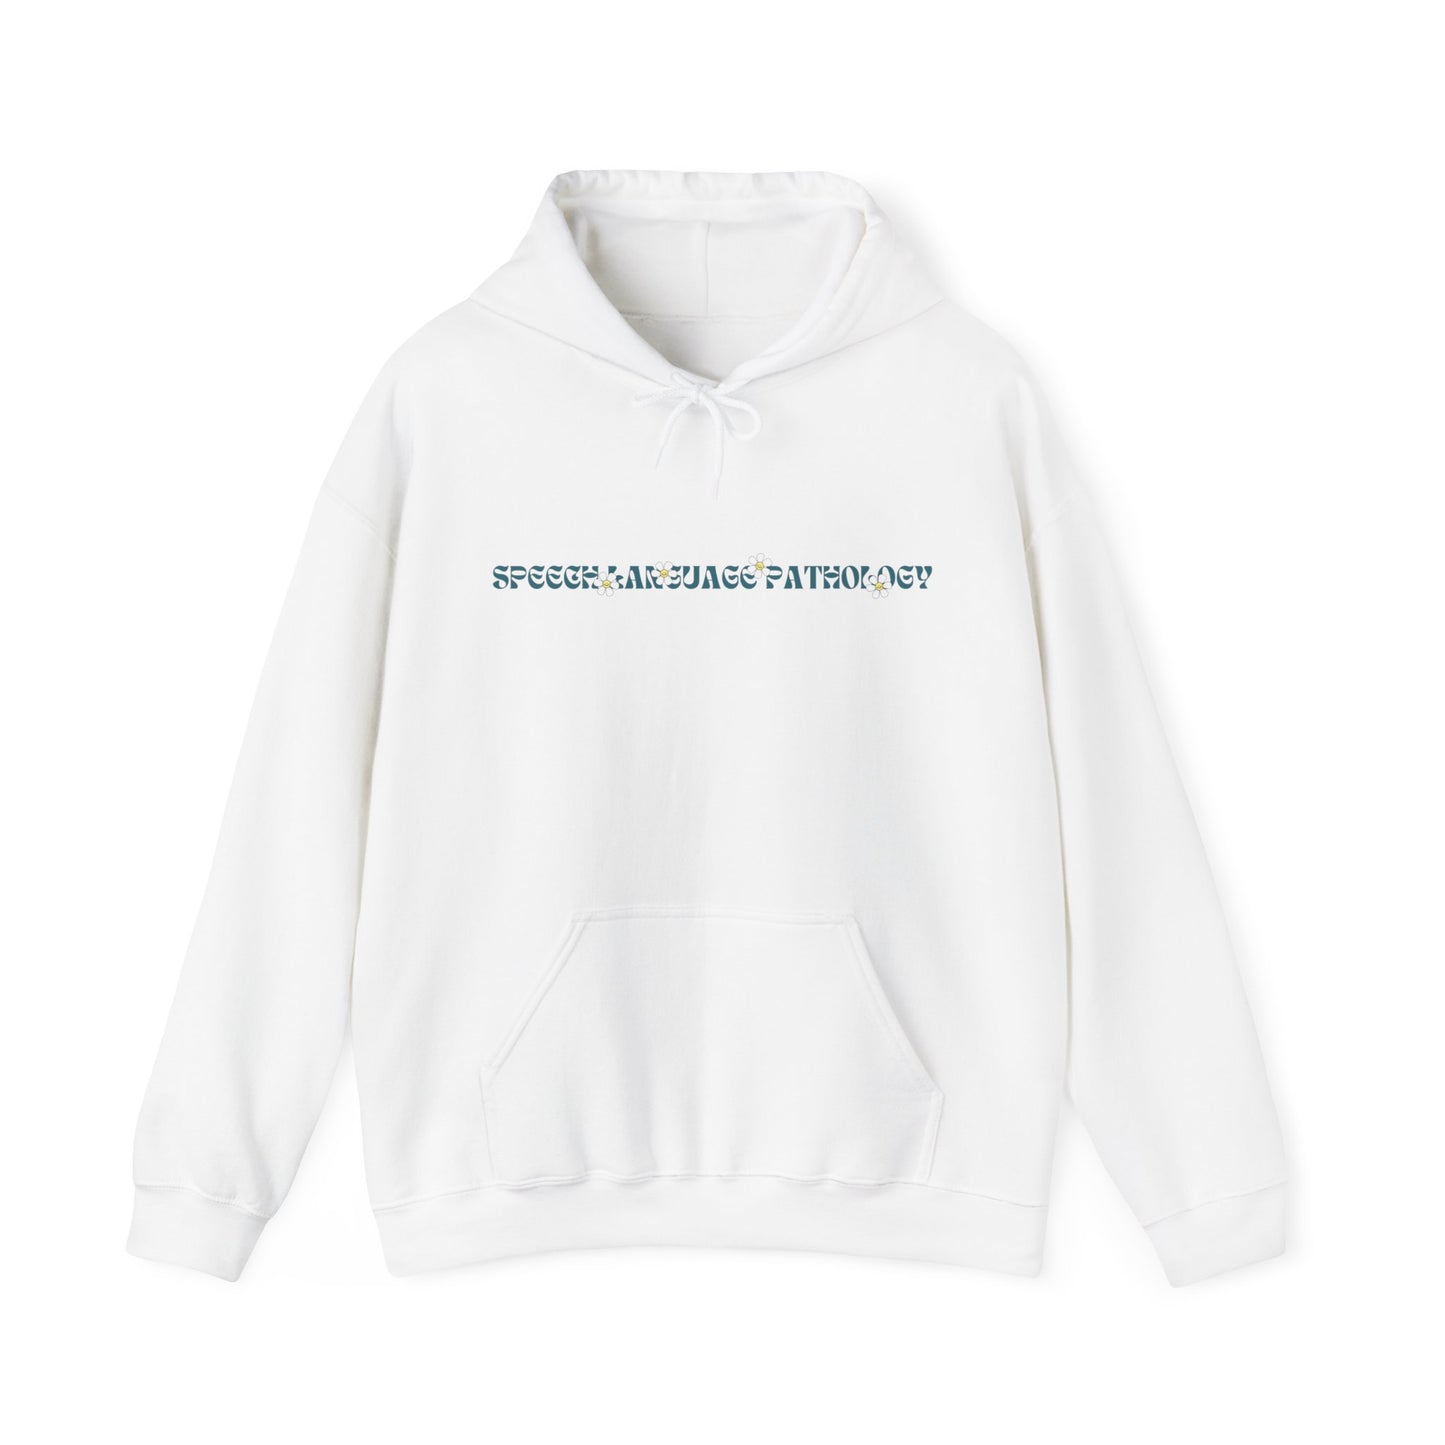 Groovy Daisy Speech Hoodie | Front and Back Print